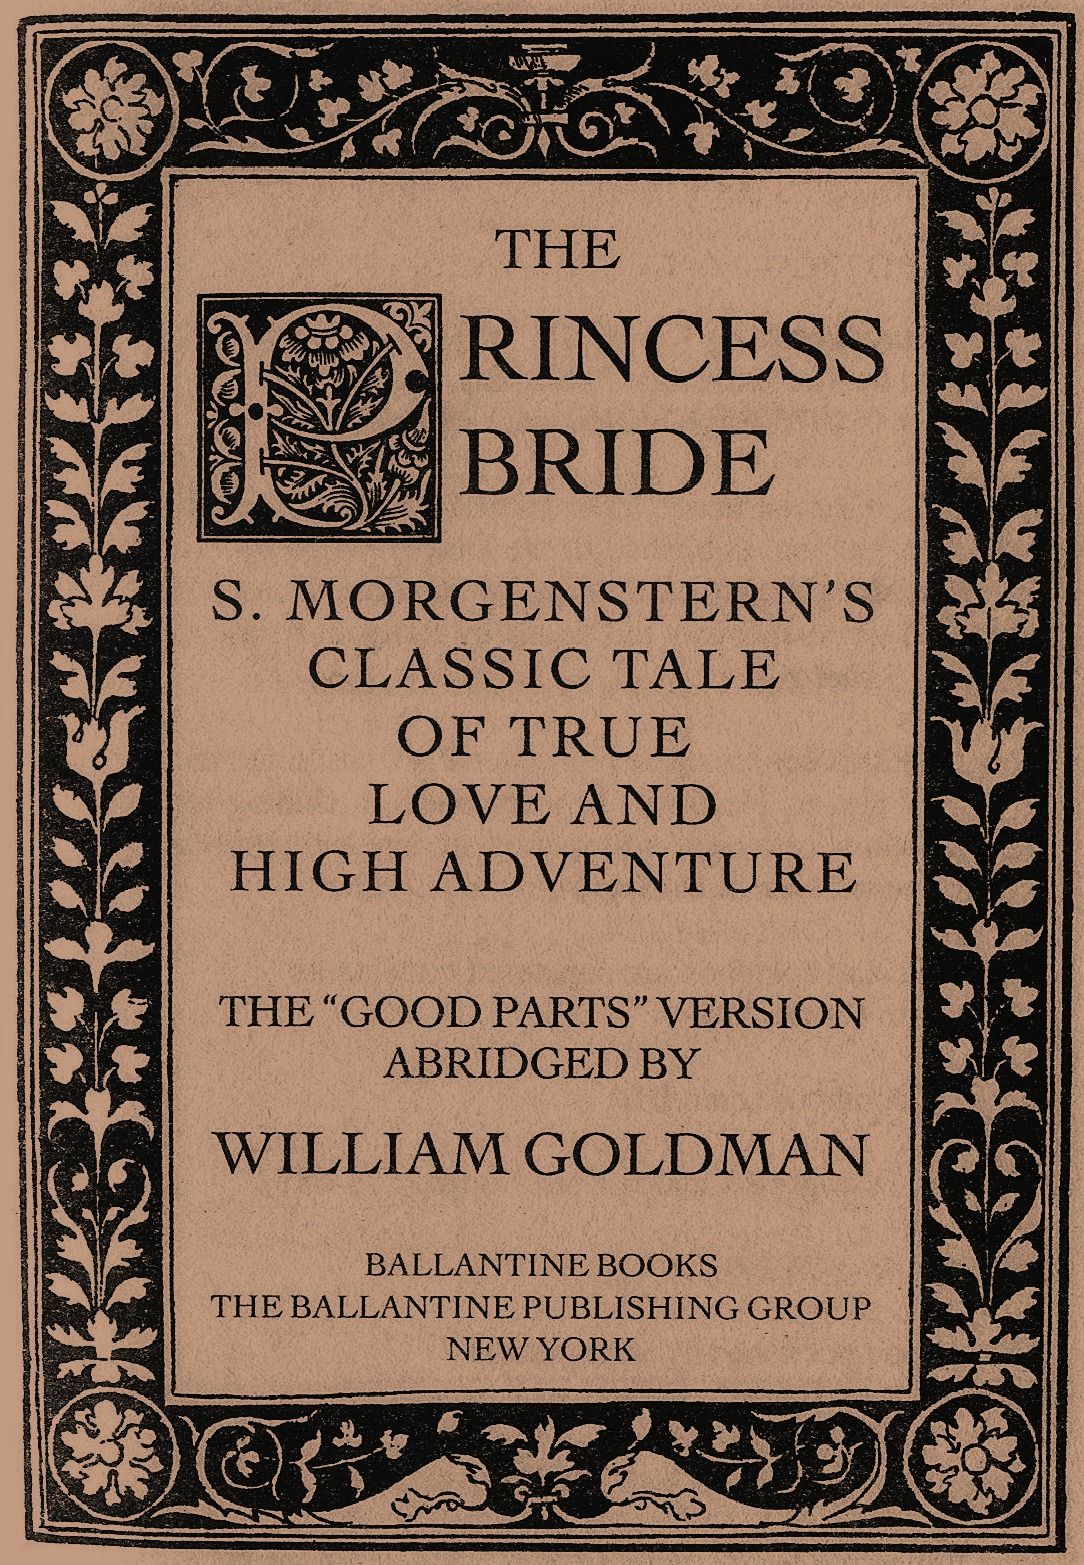 A brown book cover. Text reads: The Princess Bride, S. Morgenstern's Classic Tale of True Love and High Adventure. The "Good Parts" Version Abridged by William Goldman. Ballantine Books, The Ballantine Publishing Group New York.